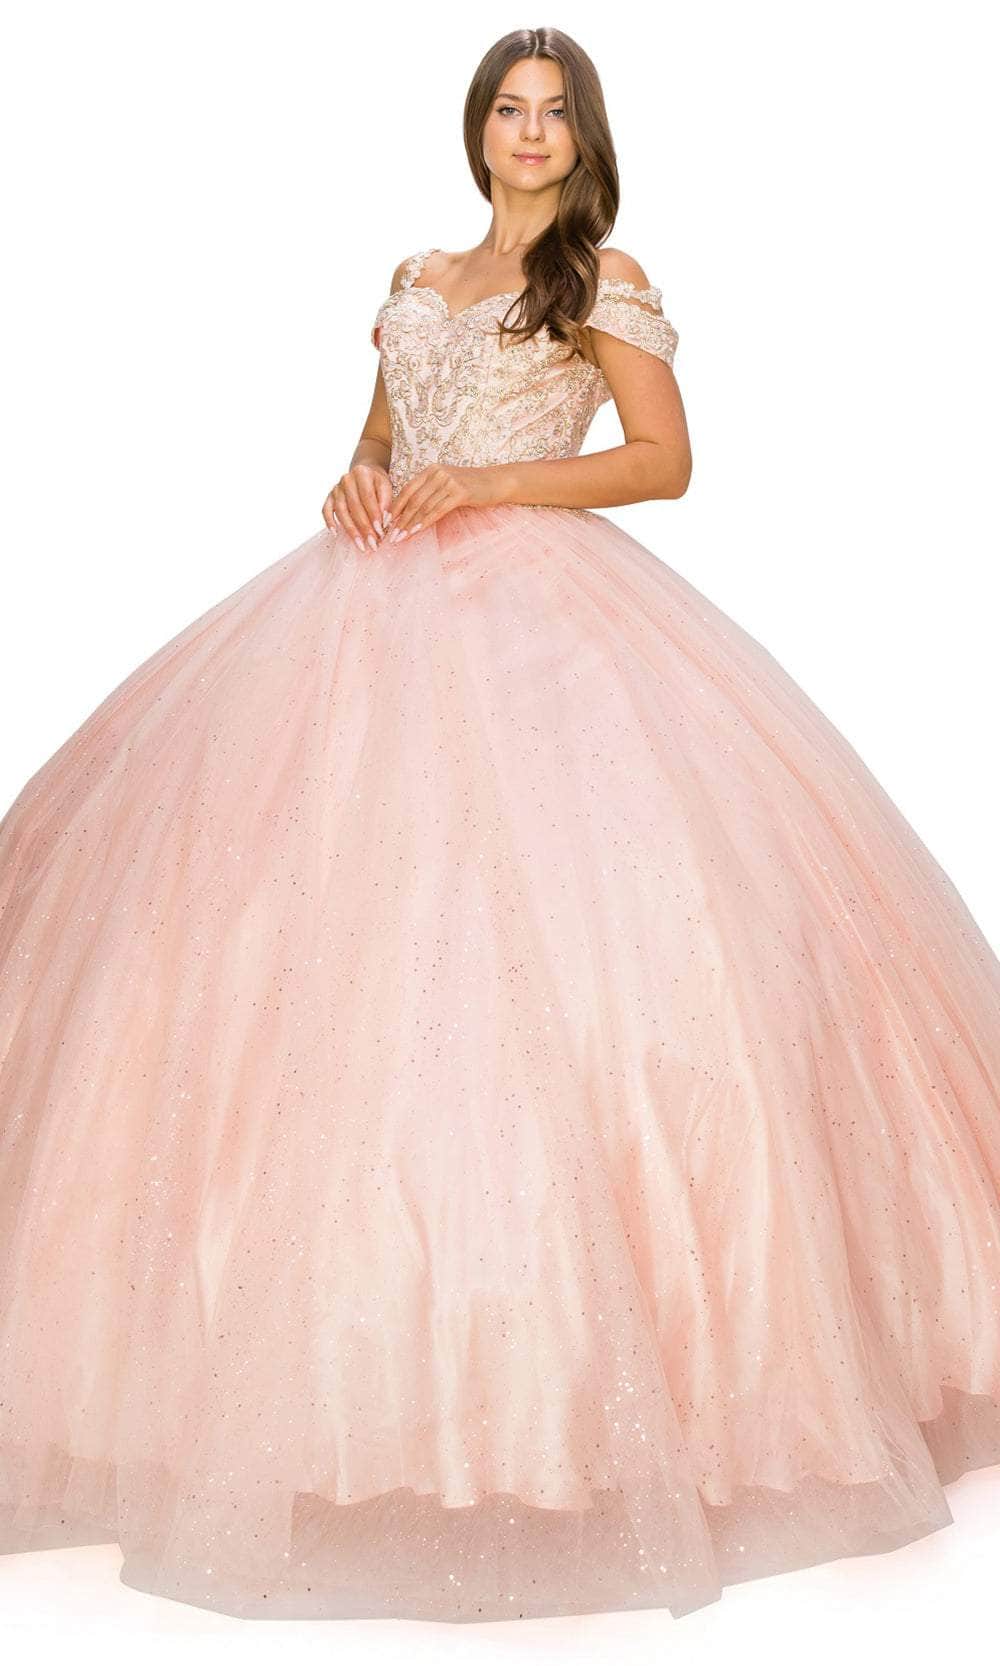 Cinderella Couture 8028J - Gold Embroidered Ballgown Special Occasion Dress